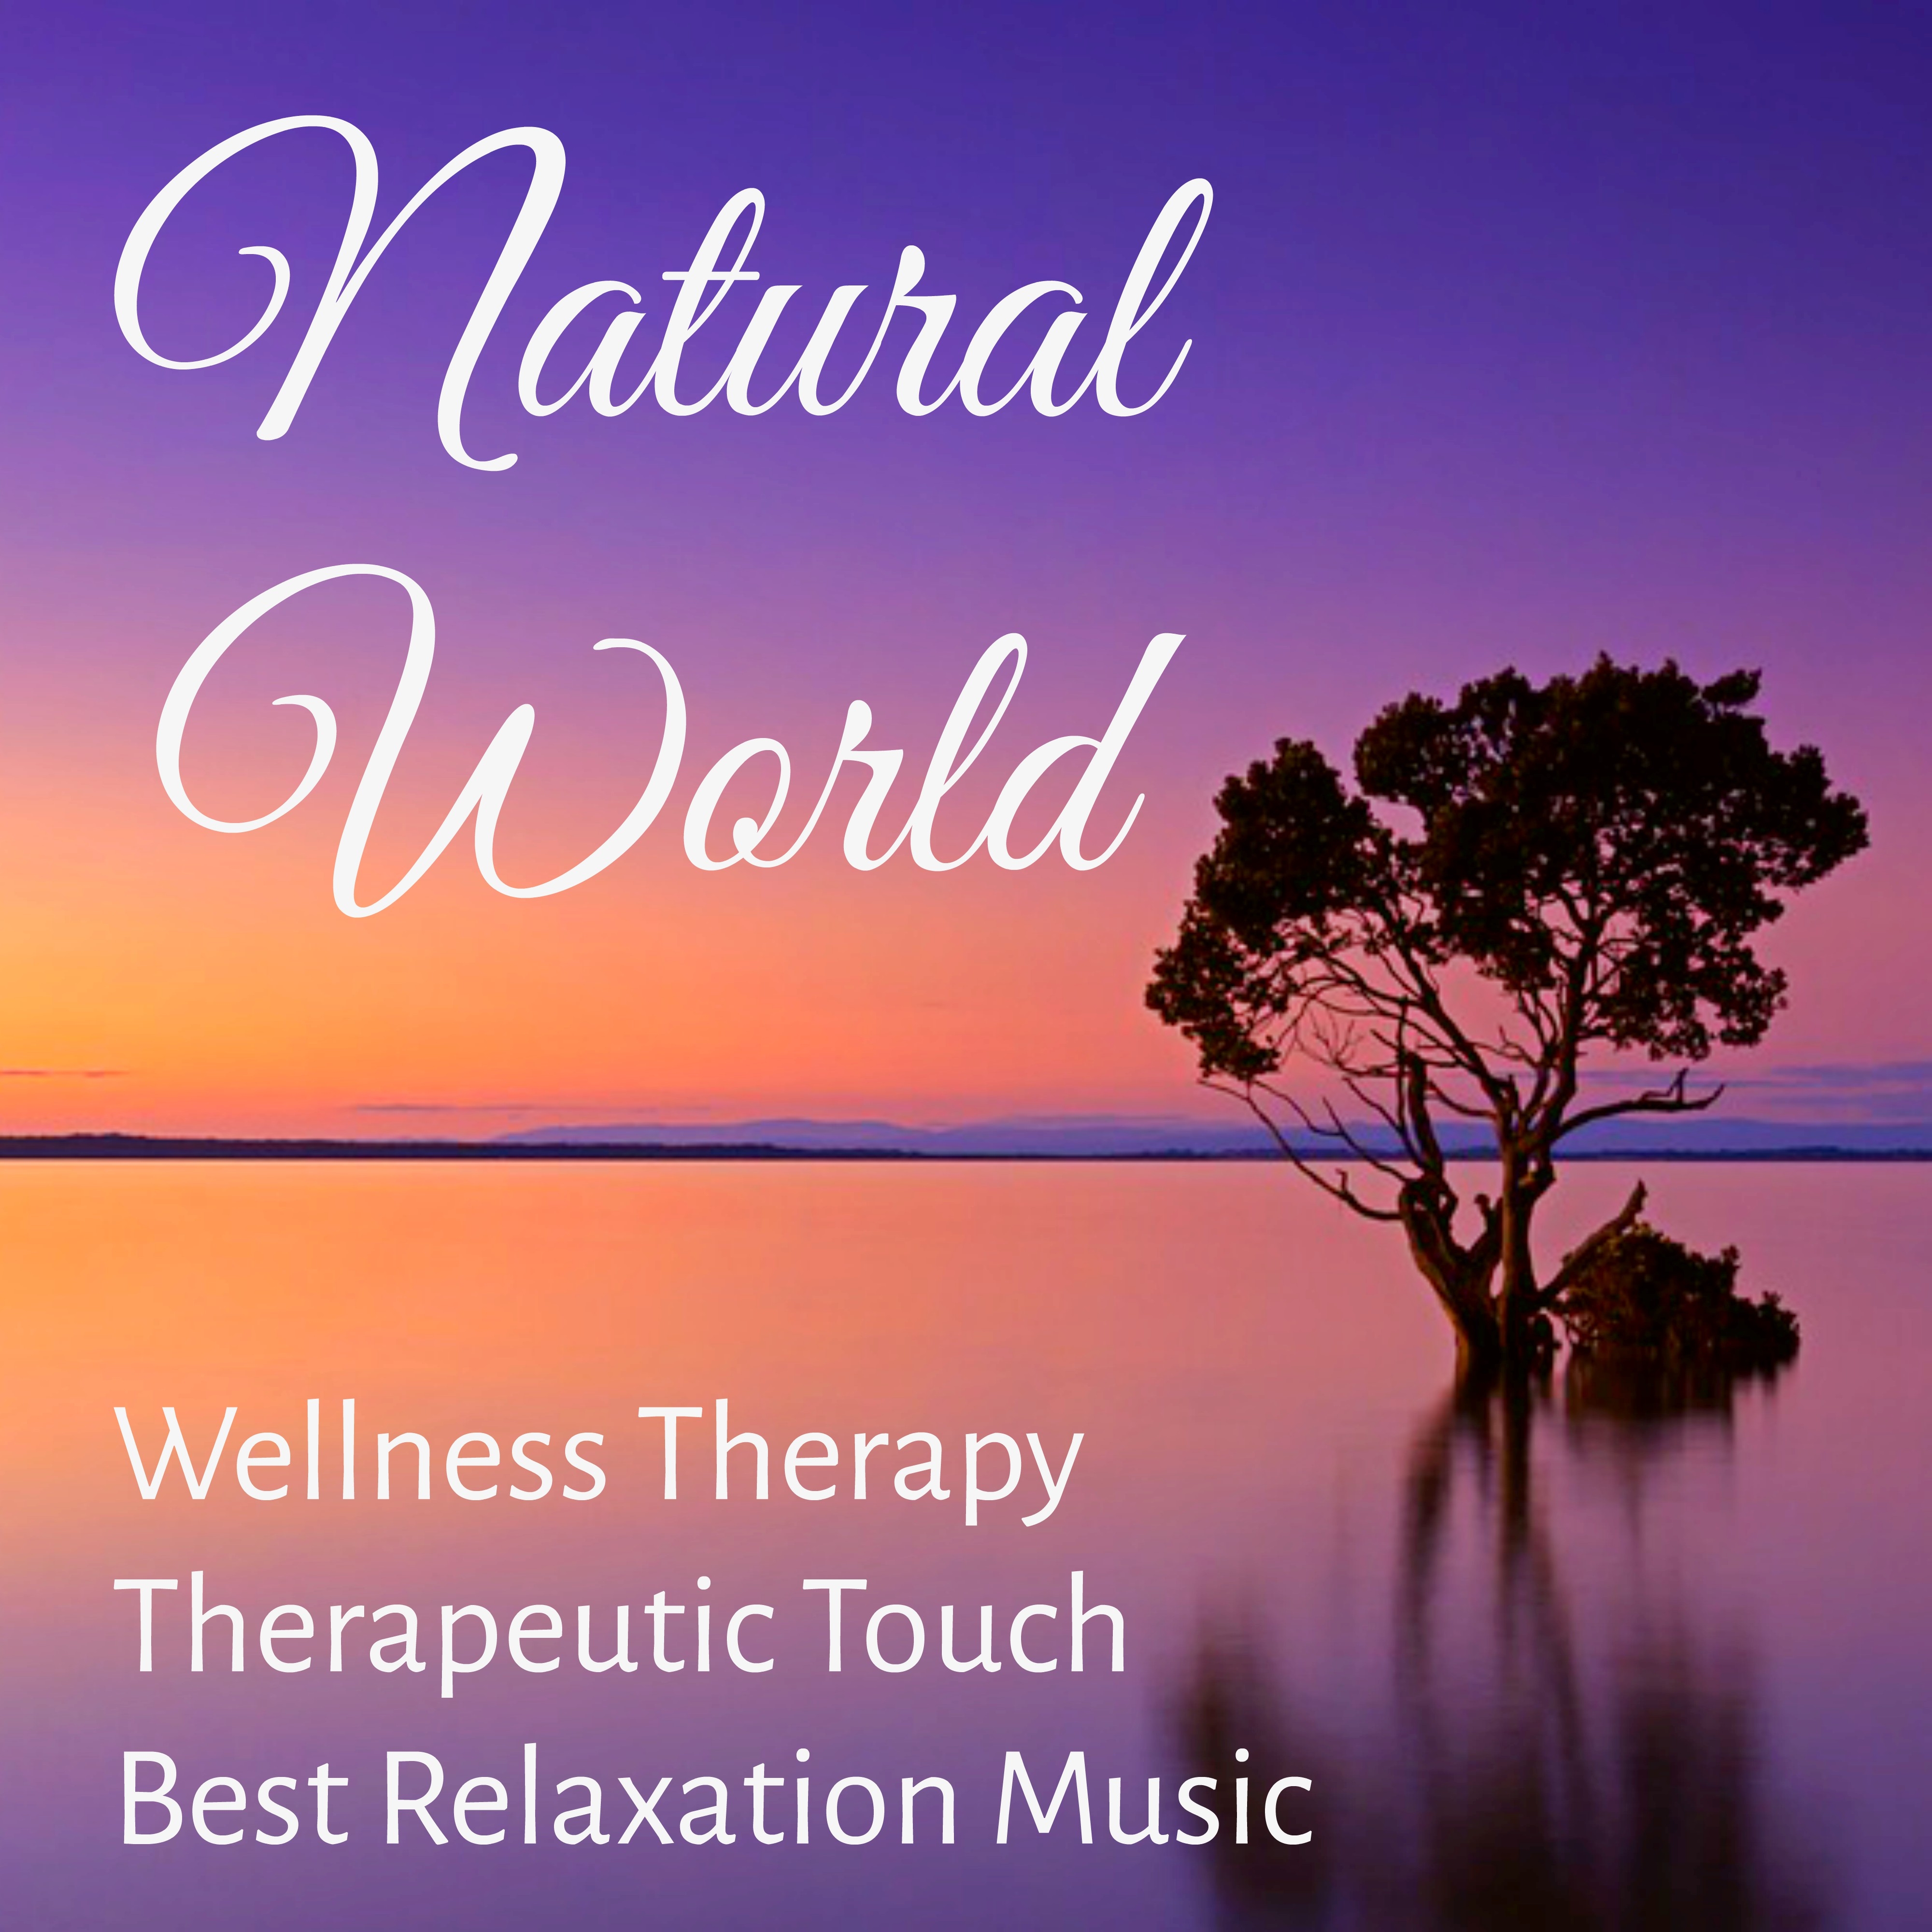 Natural World - Wellness Therapy Therapeutic Touch Best Relaxation Music for Equilibrium Balance Deep Concentration Reiki Chakras with Nature New Age Sounds